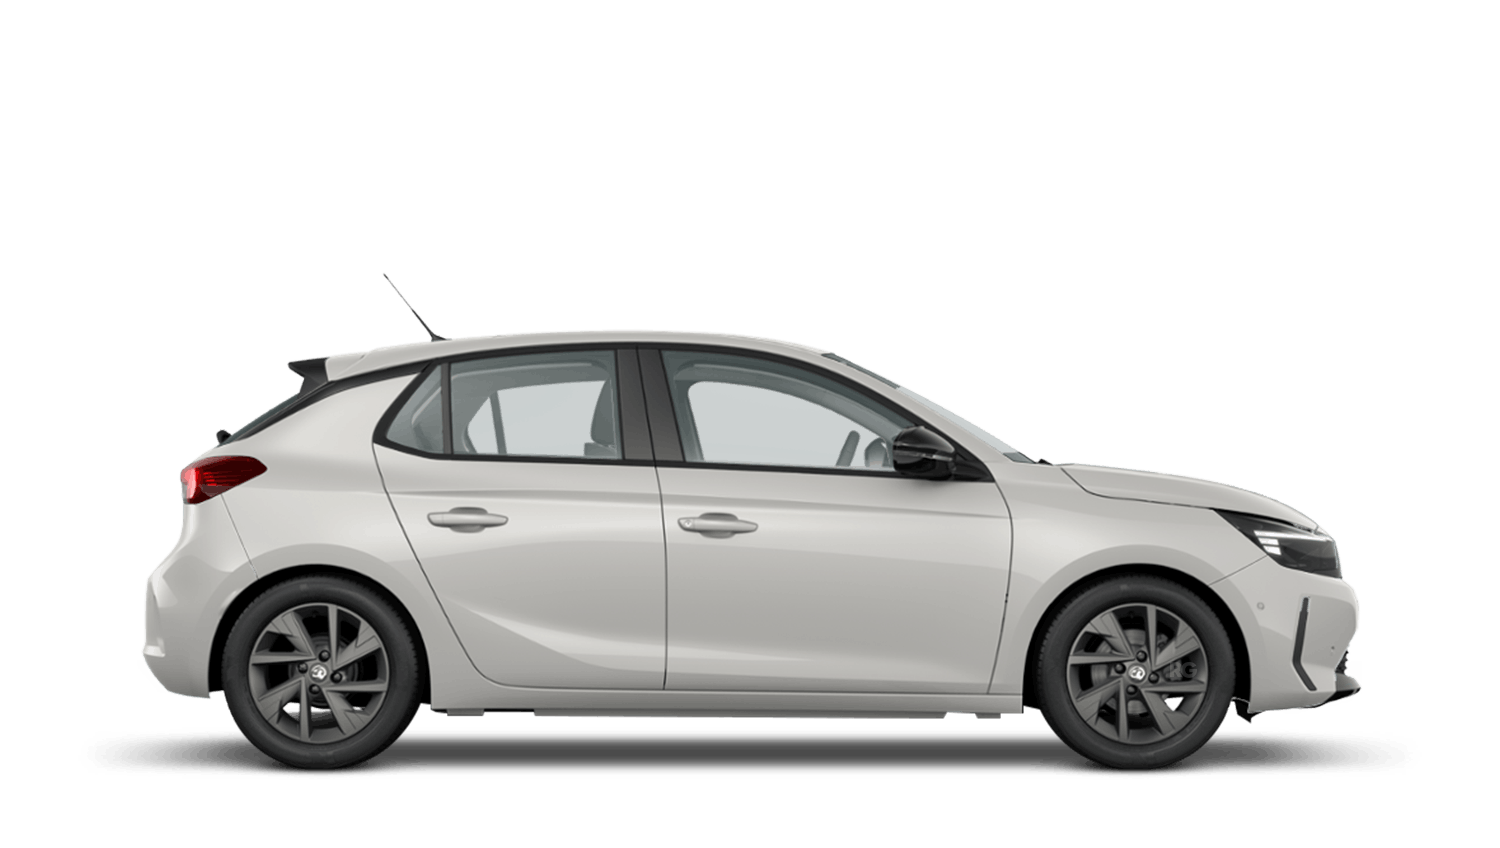 Corsa Personal Contract Hire offer